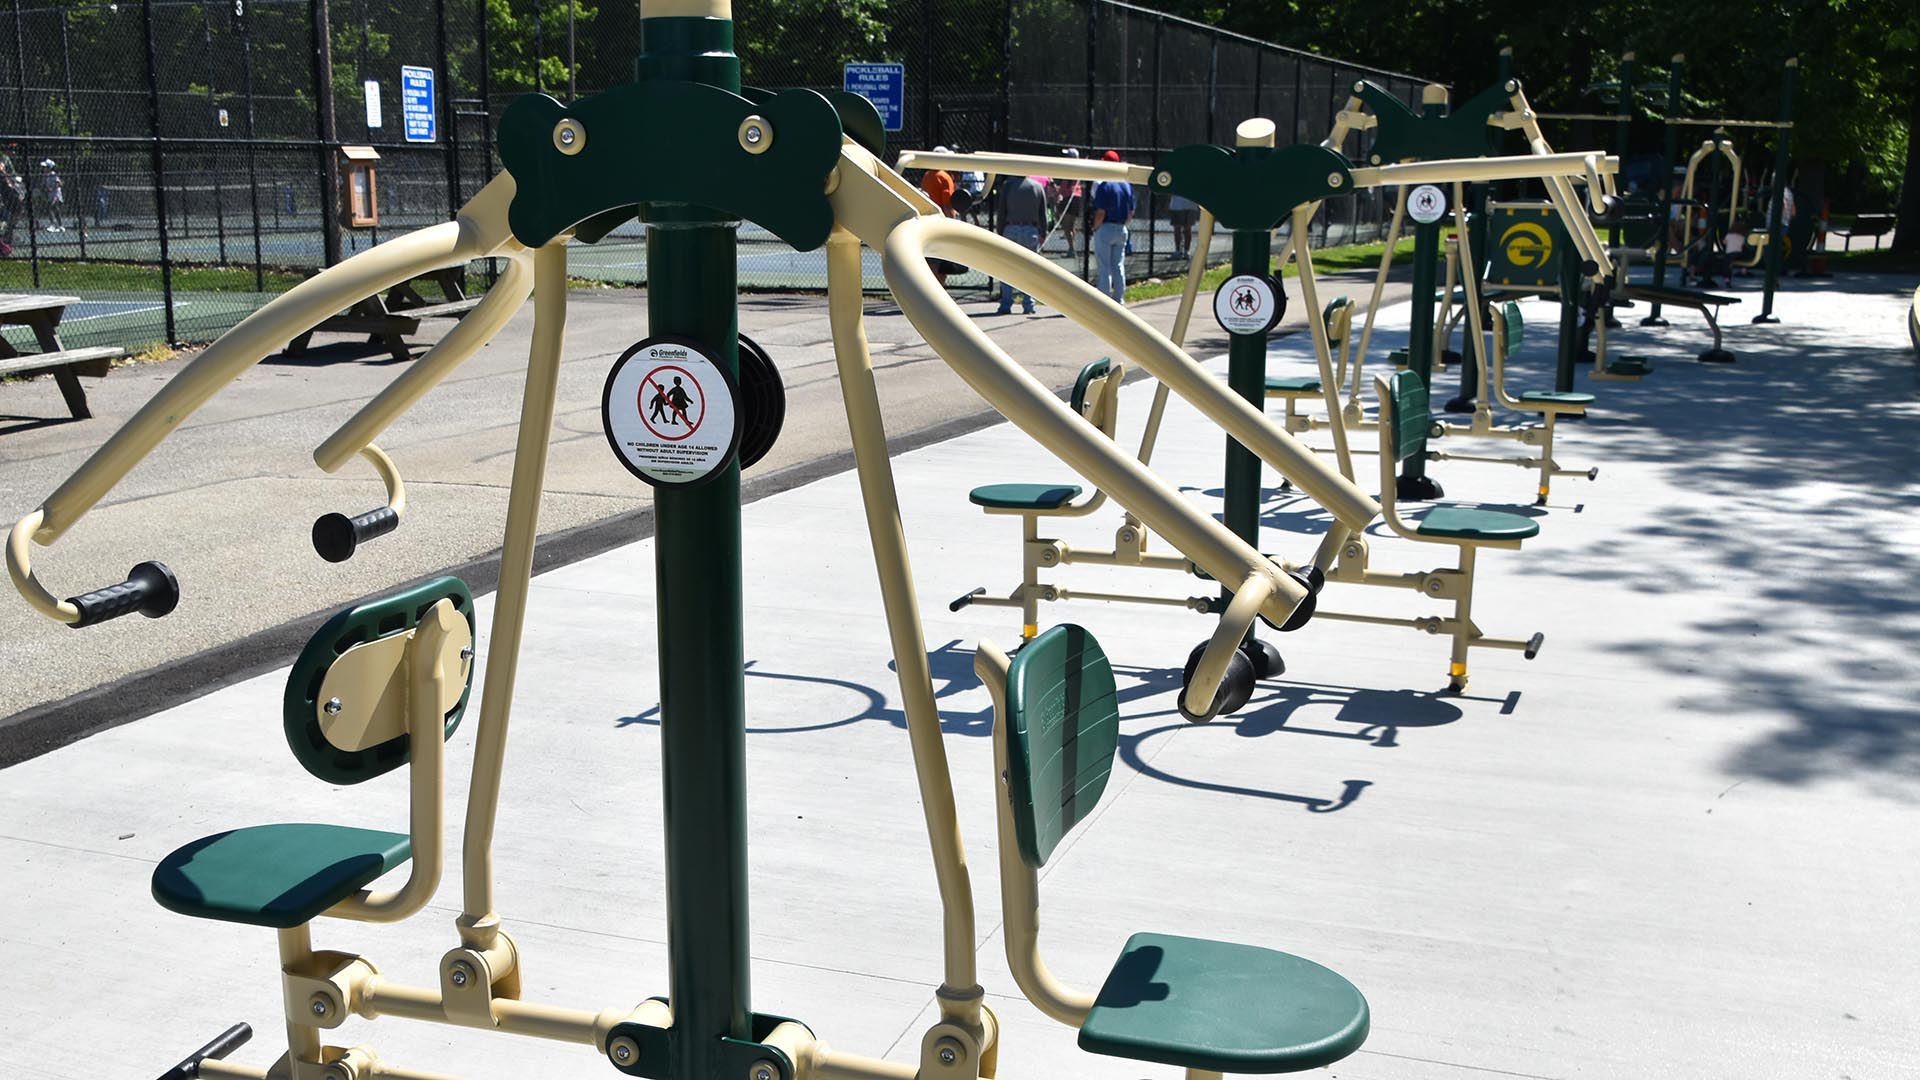 New Outdoor Exercise Stations at Civic Center Park - City of